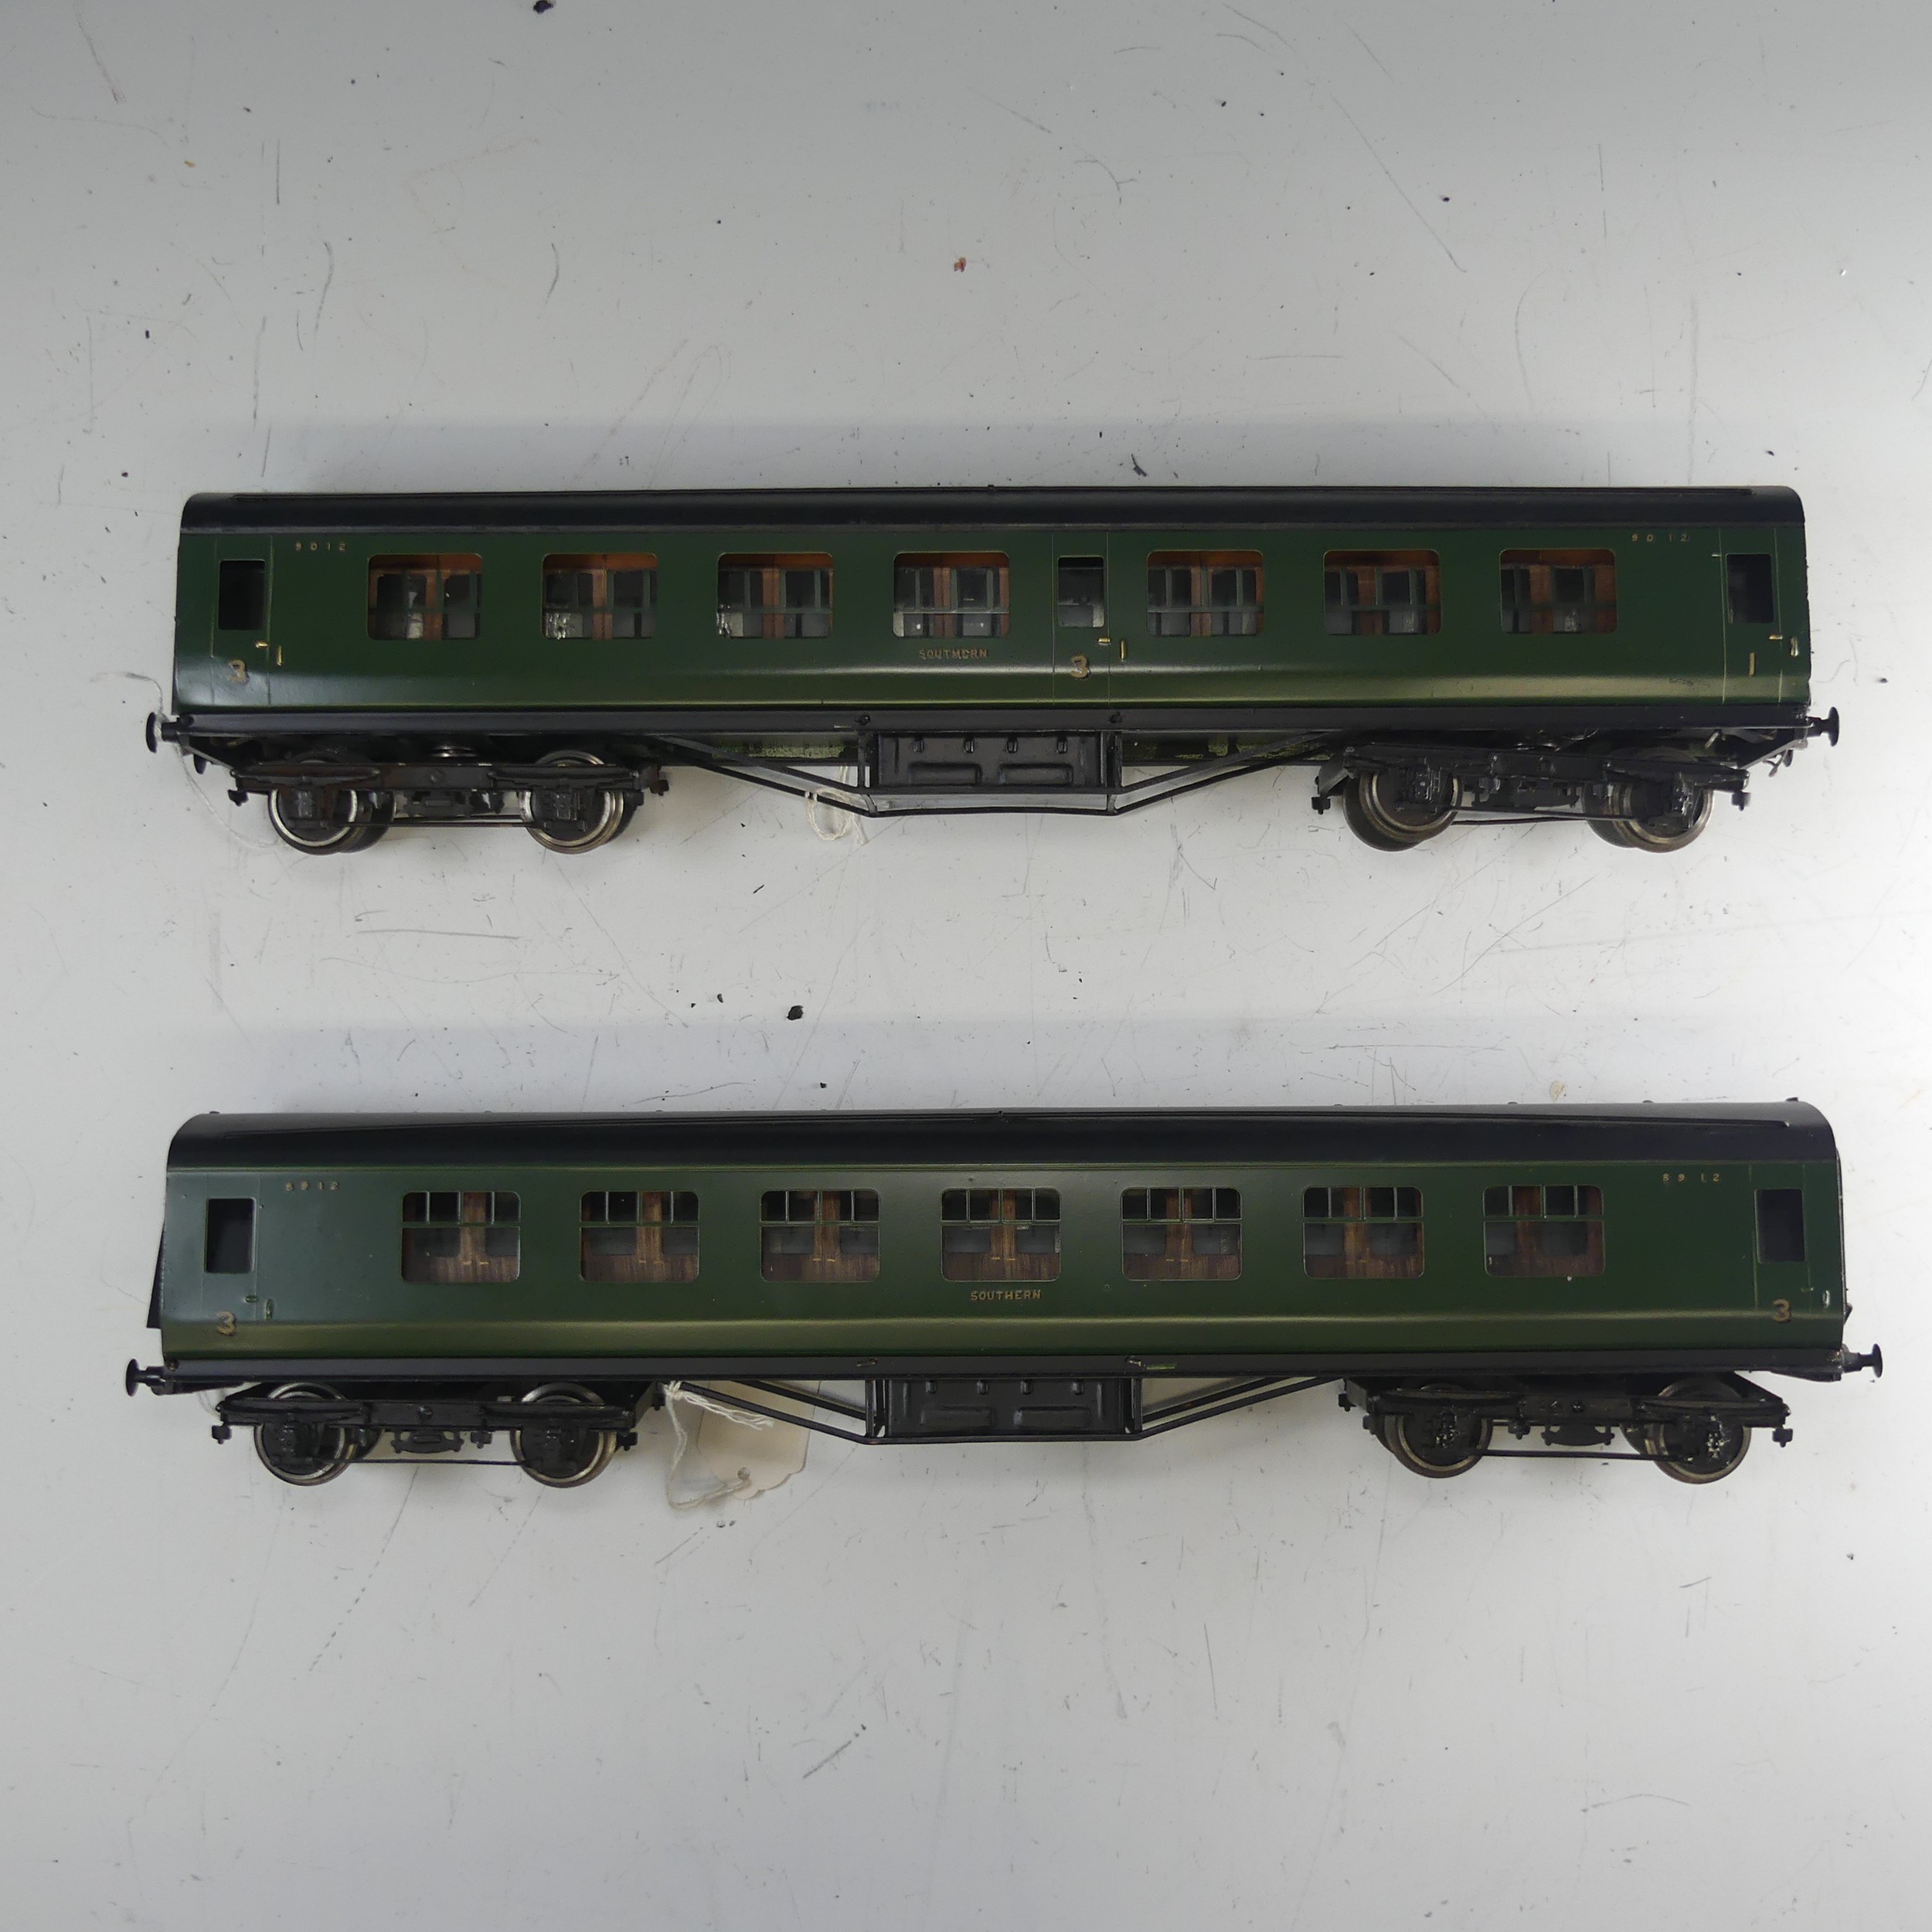 Two Exley ‘0’ gauge SR Coaches, green with yellow lettering: 1st/3rd Passenger Coach No.9012, and